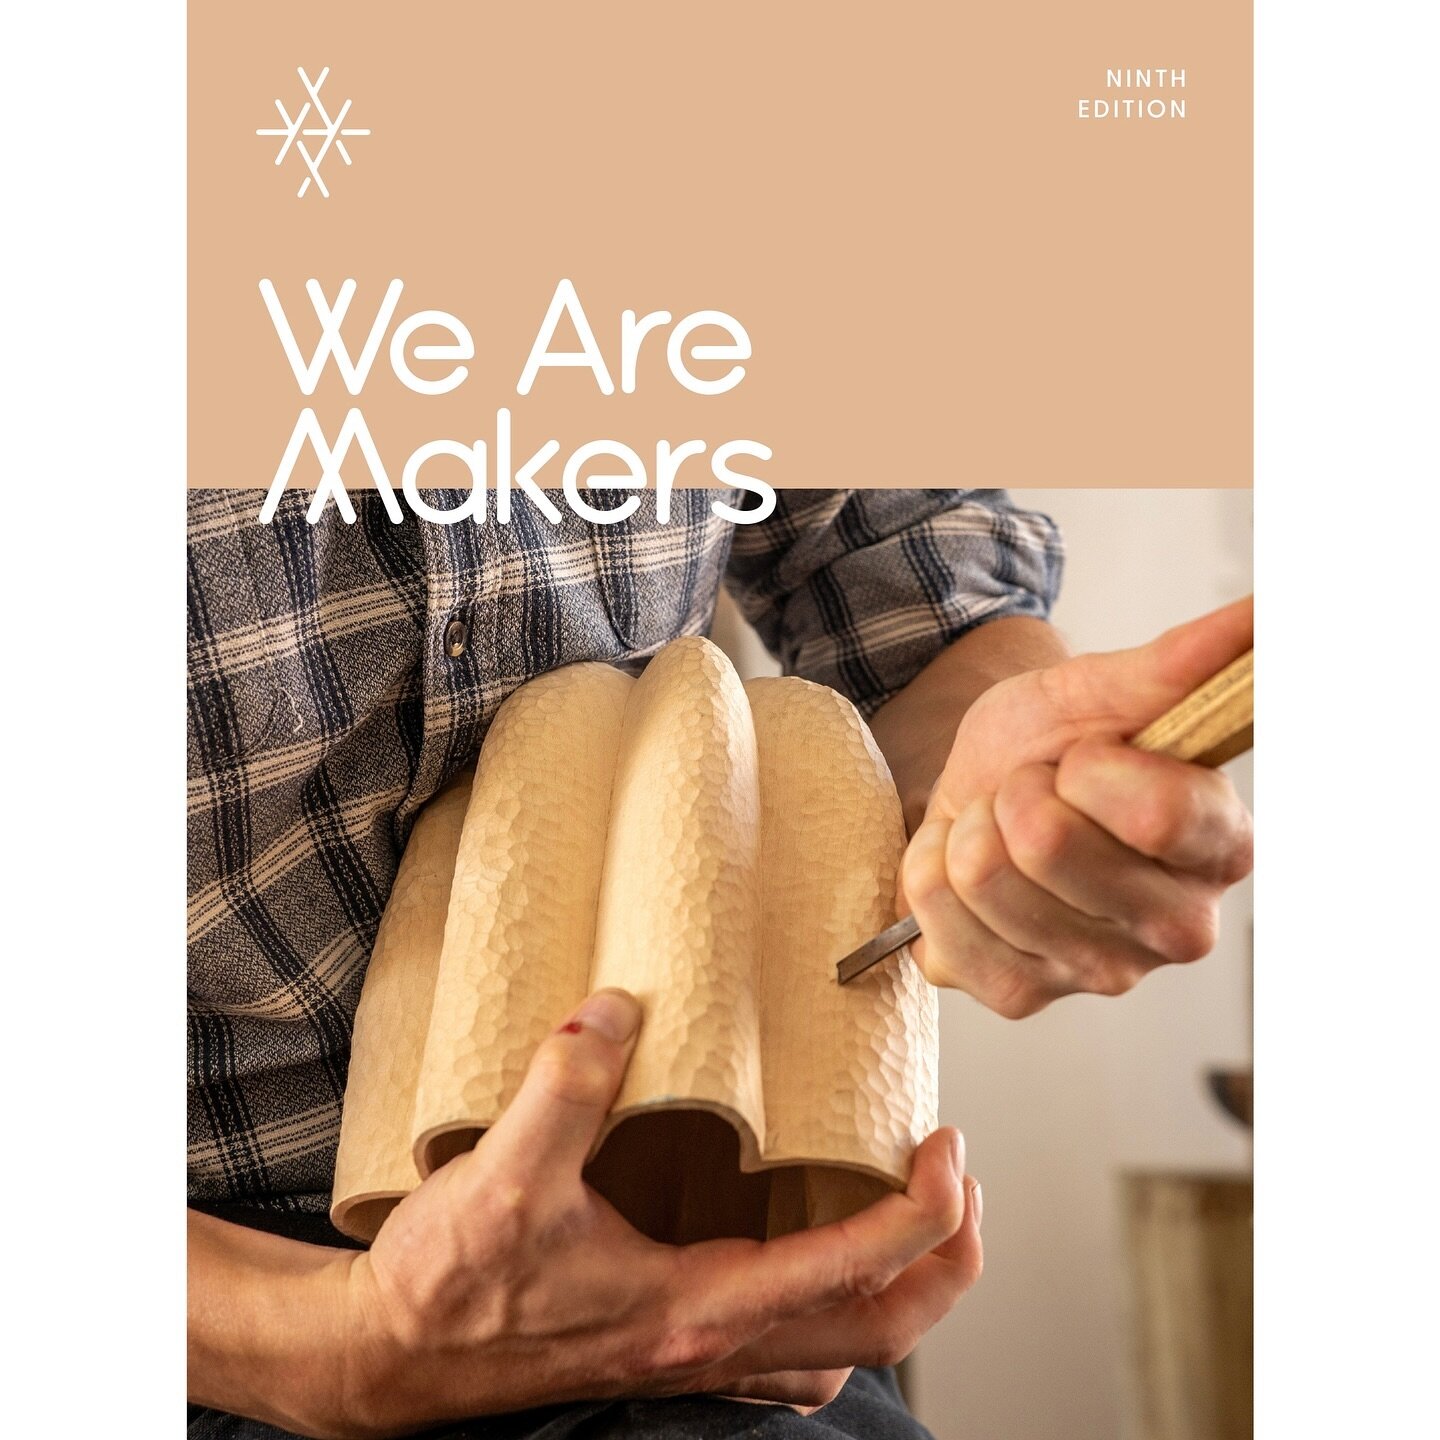 In edition 9 of @weare_makers discover an exceptional array of makers' stories from the talented leather studio @nerbhandcrafted, contemporary jewellery maker @gabrielasierramx, and French knifemaker @simonchefknife. In stock now!